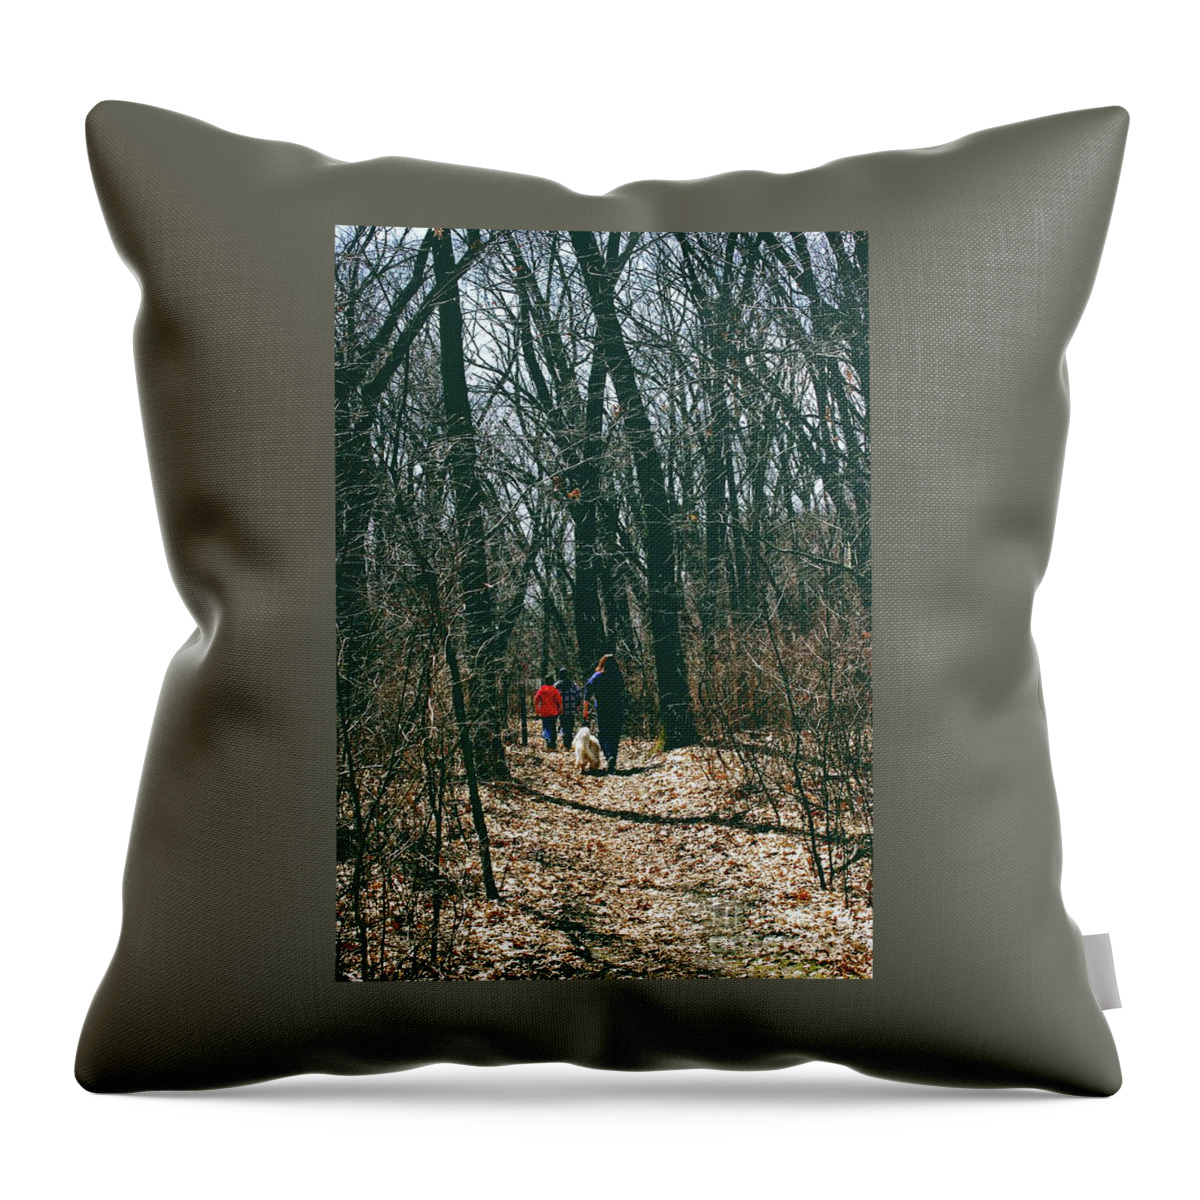  Nature Throw Pillow featuring the photograph Perfect Moment by Frank J Casella